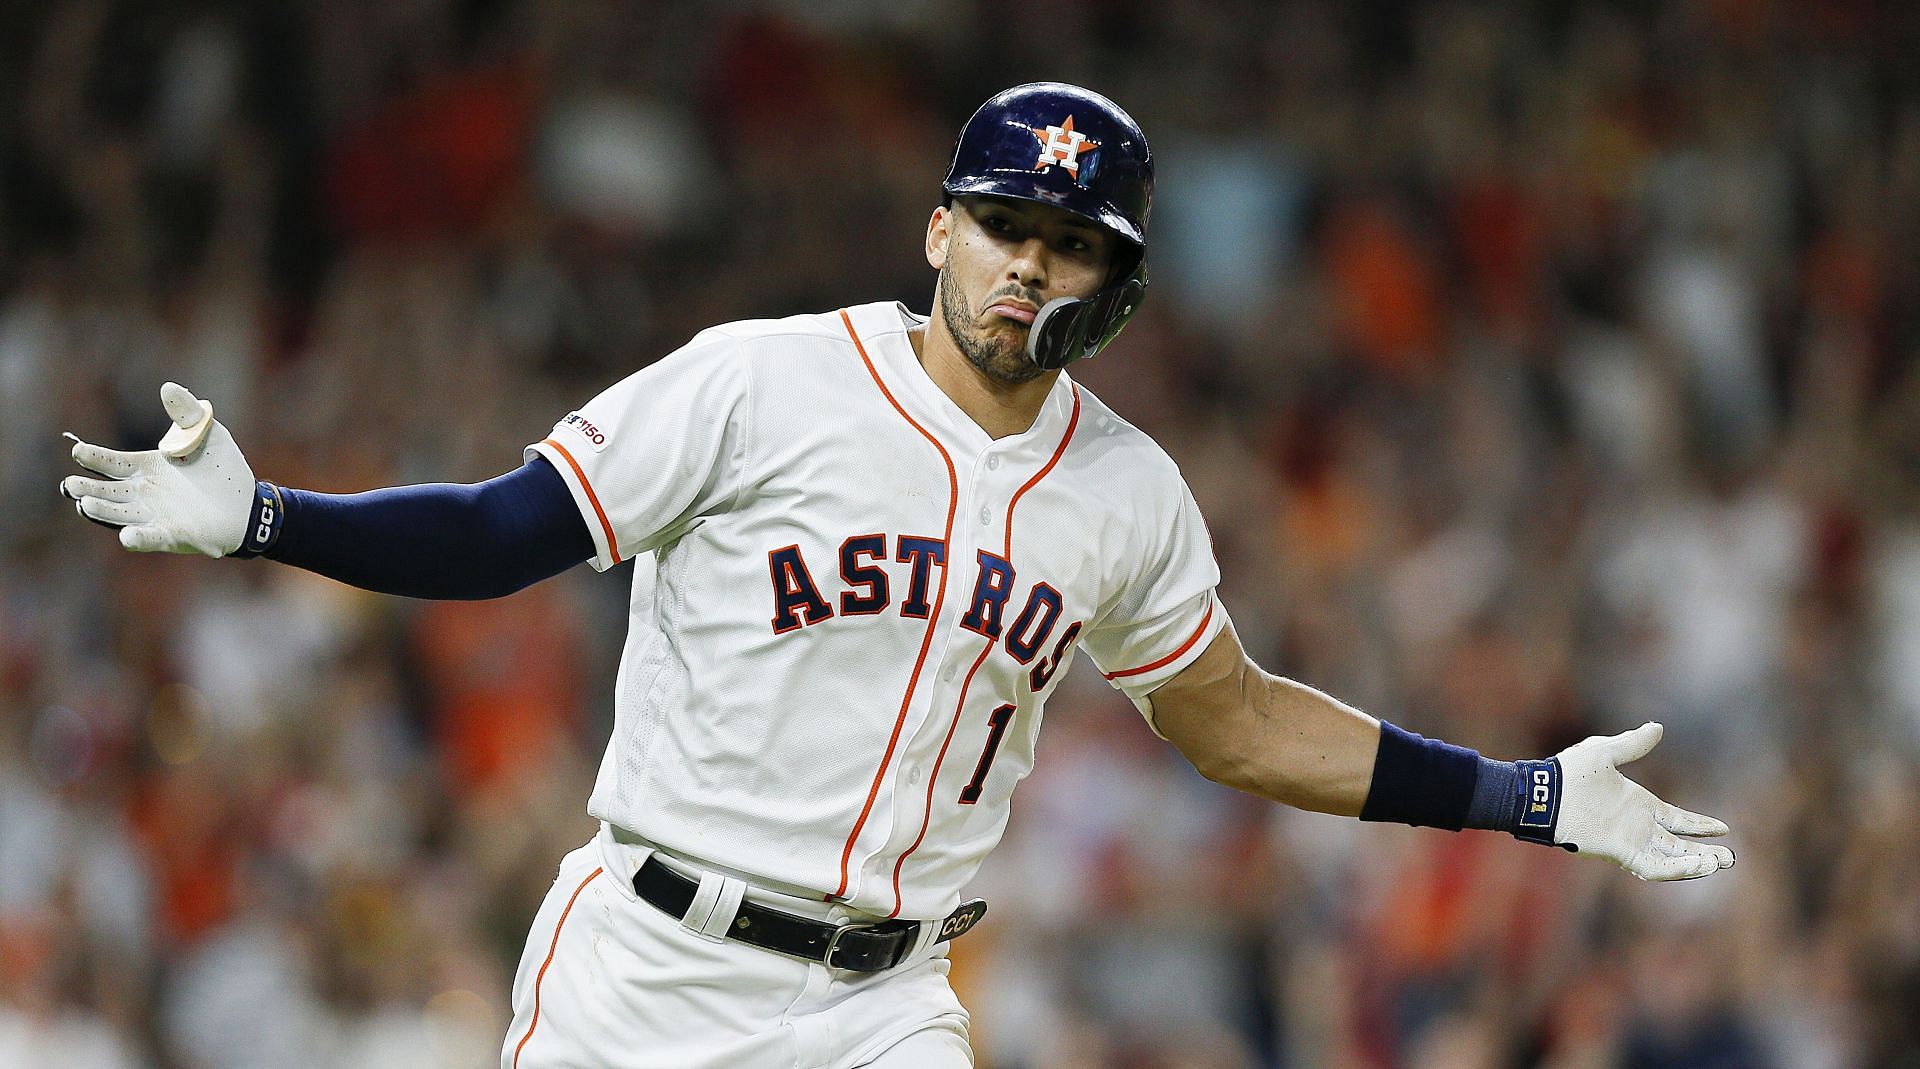 HOUSTON, TEXAS - MAY 25: Carlos Correa #1 of the Houston Astros celebrates after hitting a walk-off single in the ninth inning against the Boston Red Sox at Minute Maid Park on May 25, 2019, in Houston, Texas.  (Photo by Bob Levey/Getty Images)